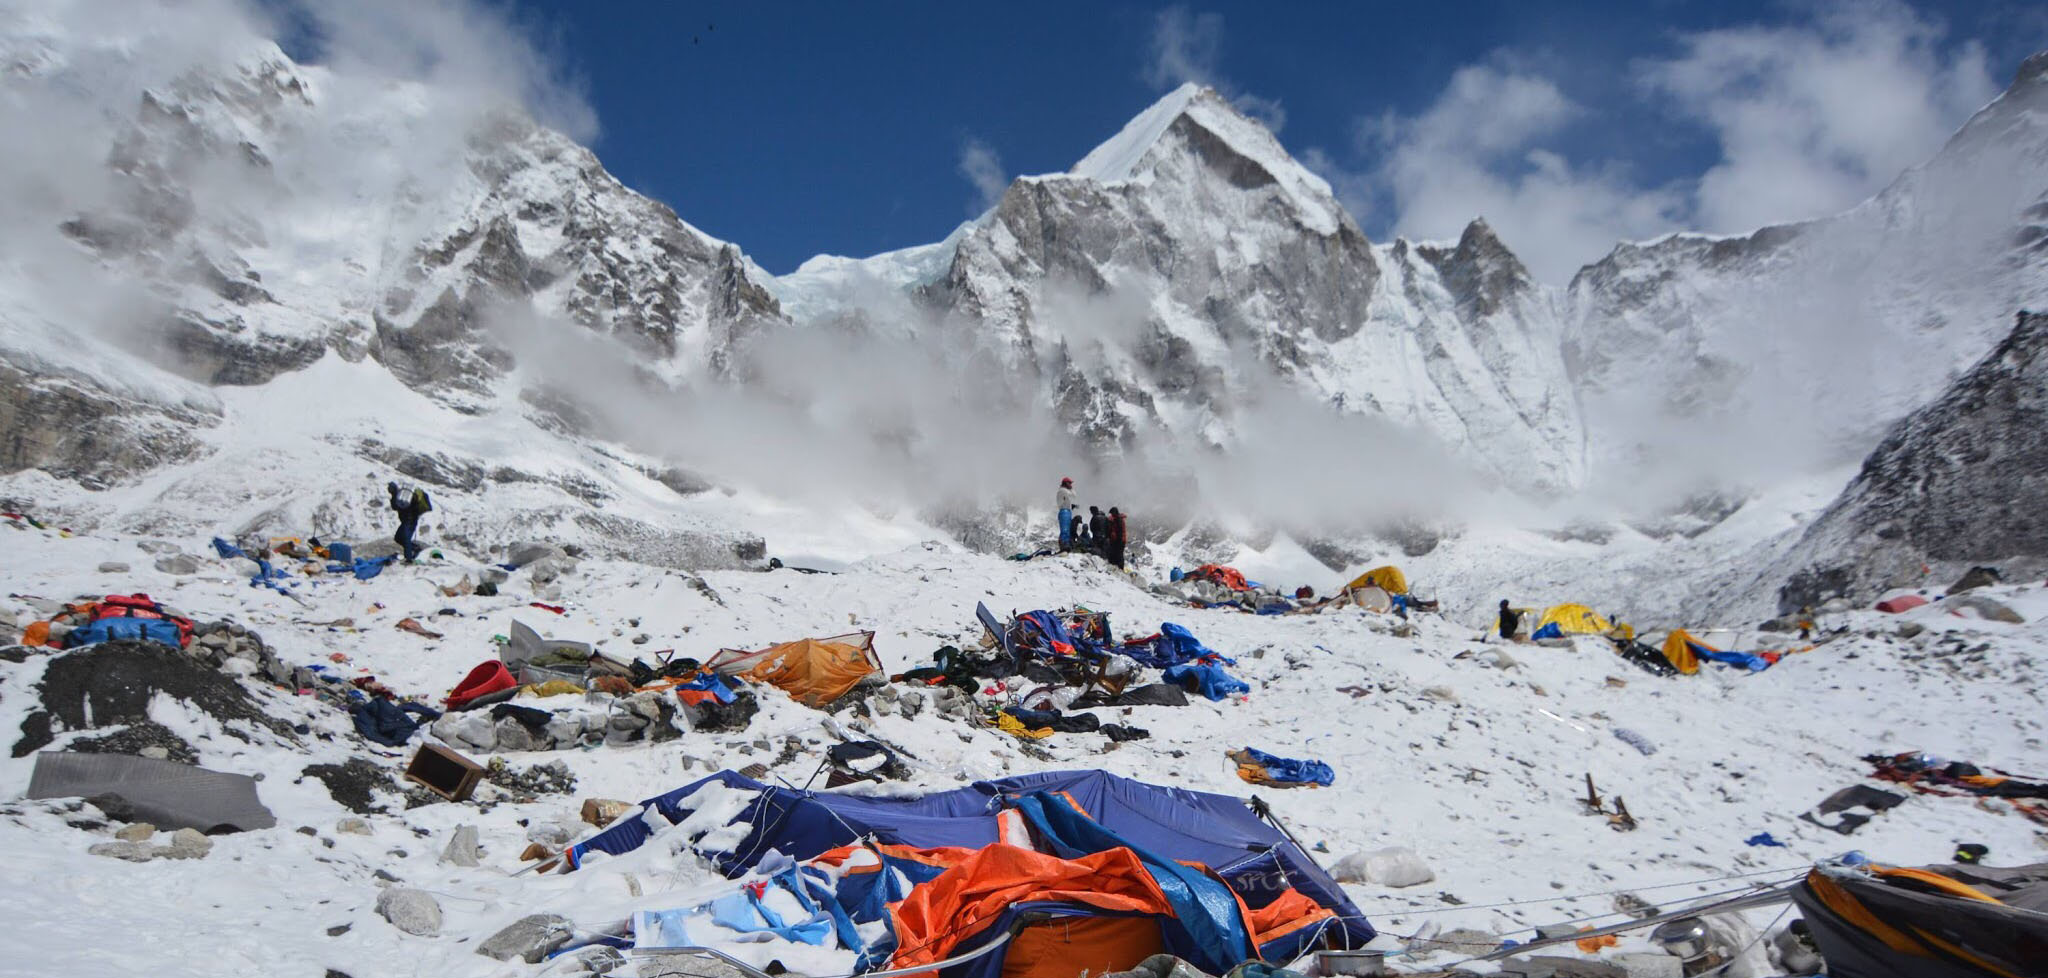 Everest base camp. Photo by Nic Dumesnil.